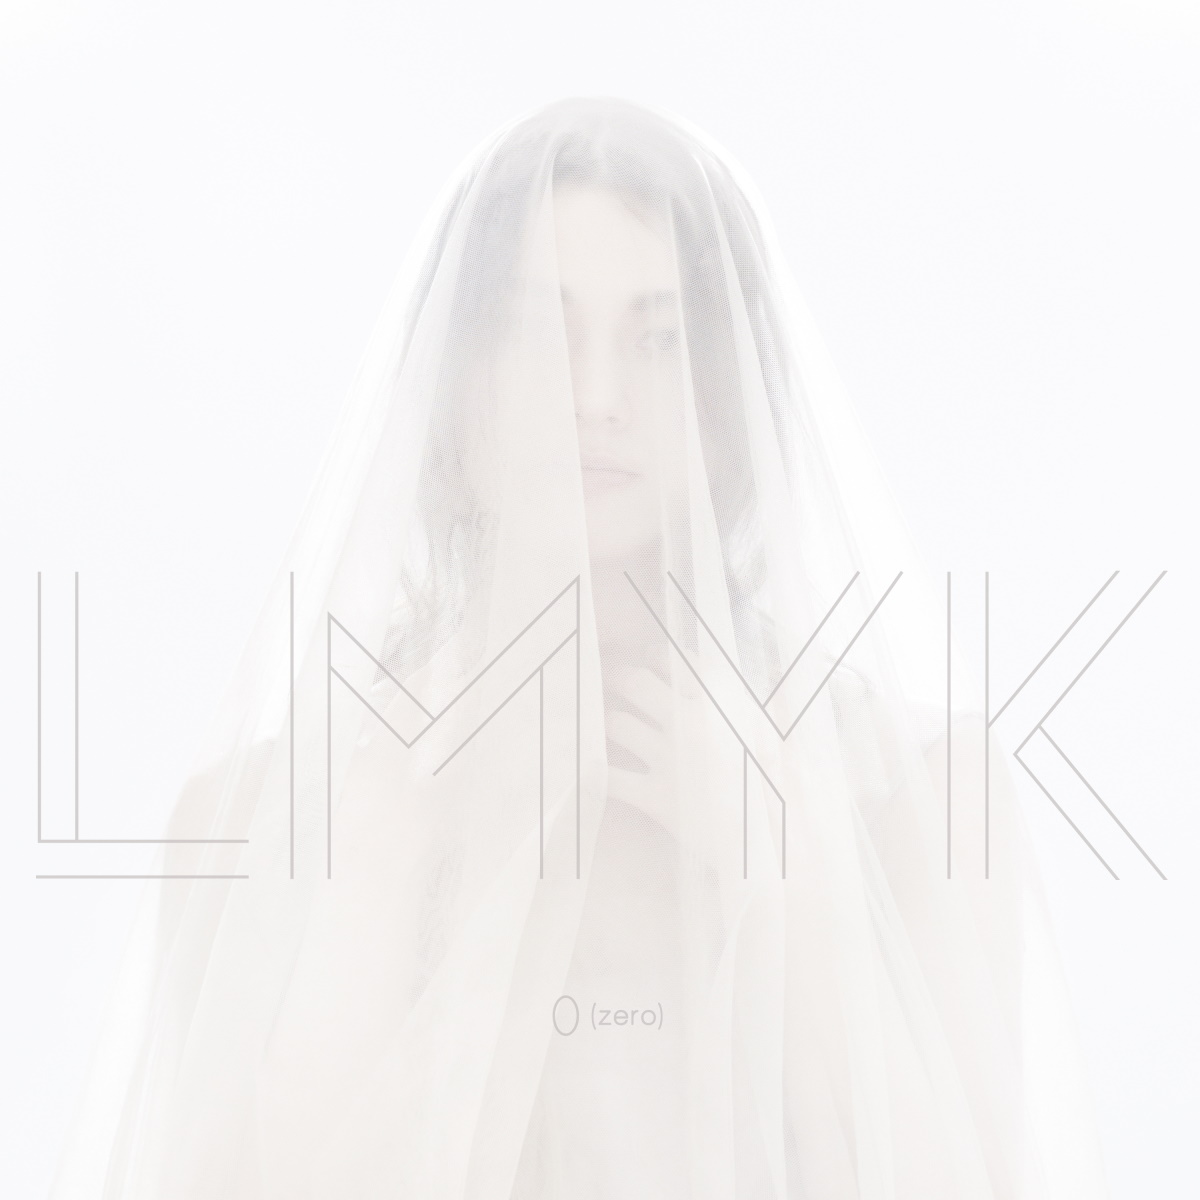 Cover art for『LMYK - 0 (zero)』from the release『0(zero)